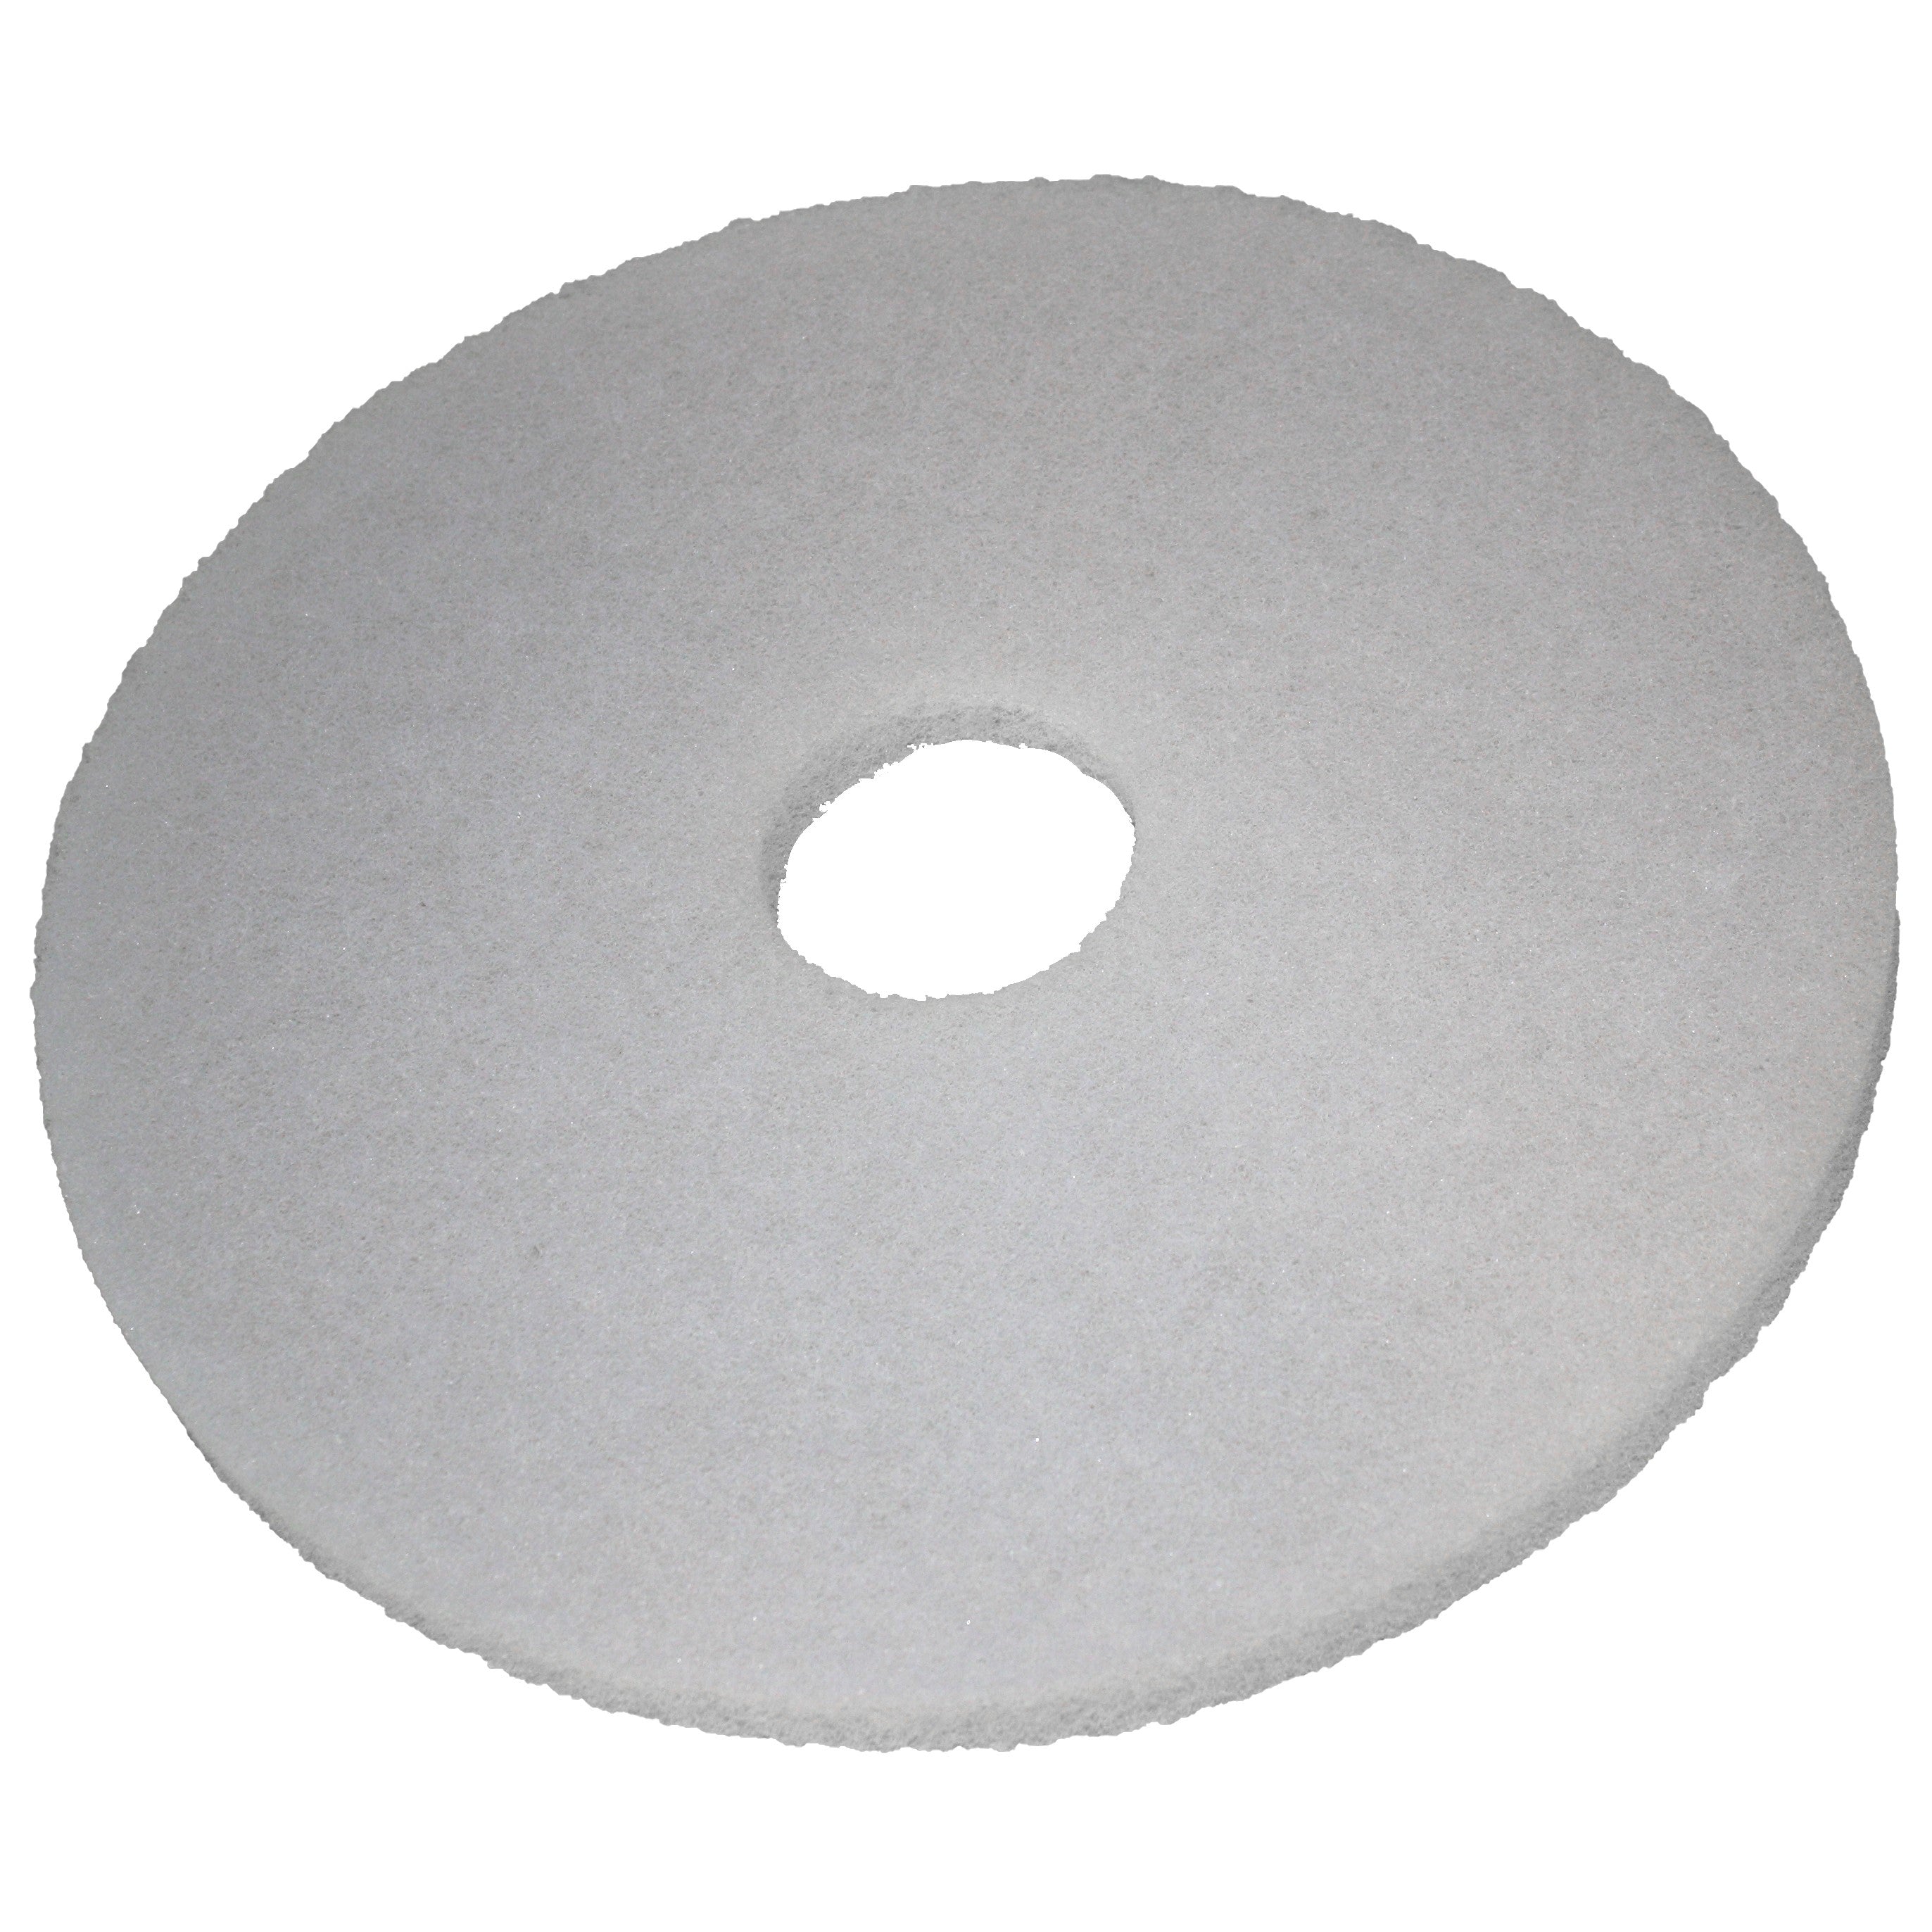 Pad weiss, Ø 457 mm, Polyester